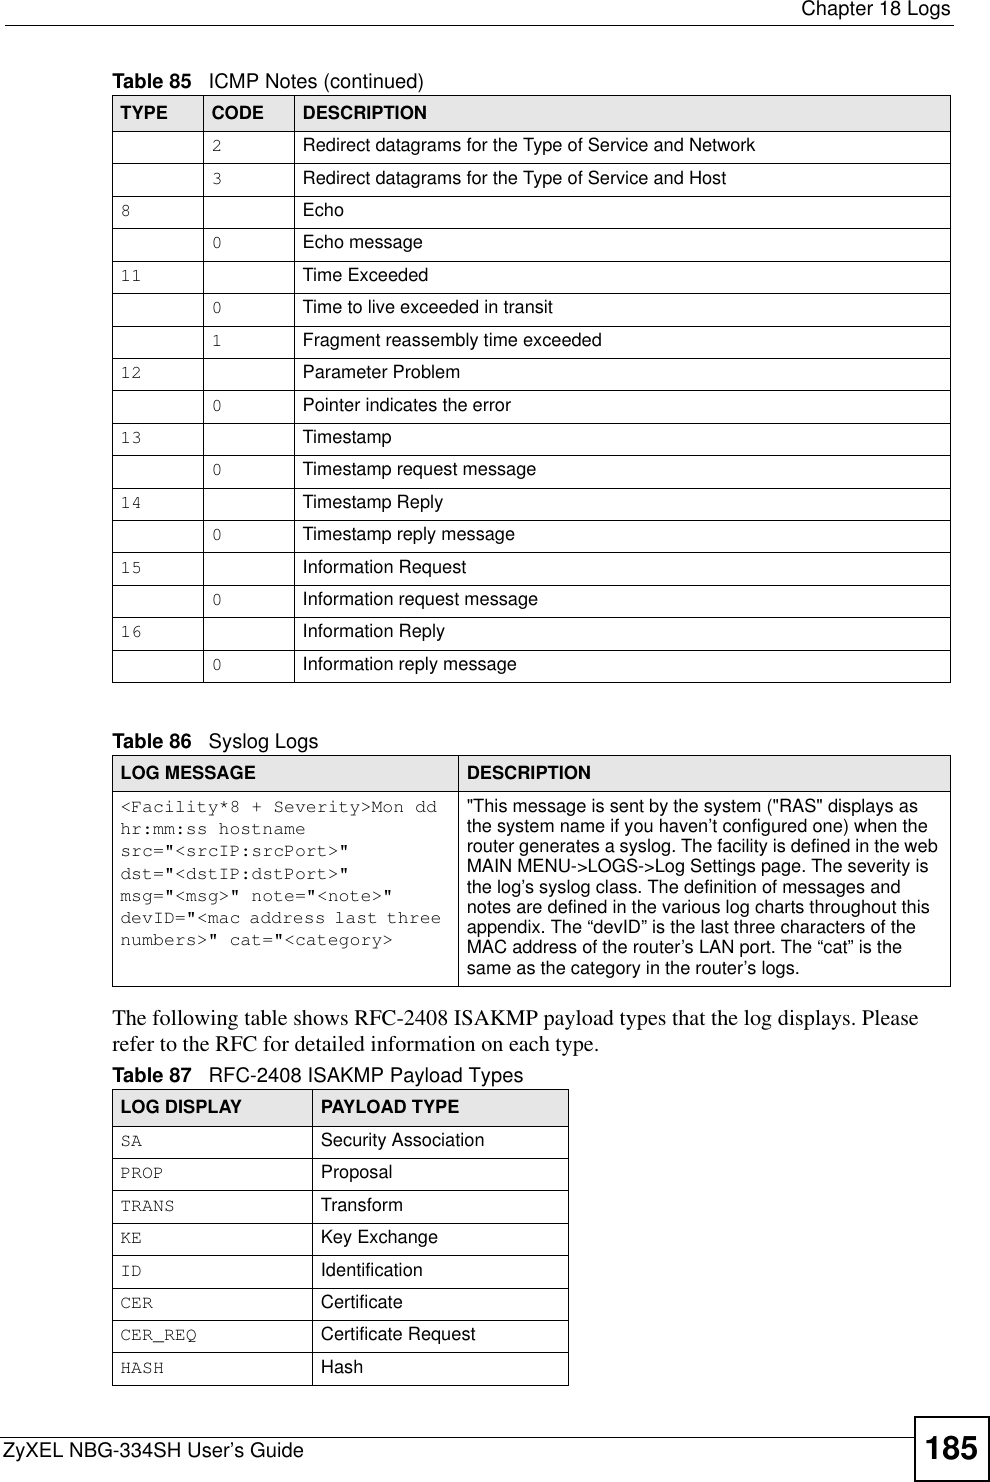  Chapter 18 LogsZyXEL NBG-334SH User’s Guide 185The following table shows RFC-2408 ISAKMP payload types that the log displays. Please refer to the RFC for detailed information on each type. 2Redirect datagrams for the Type of Service and Network3Redirect datagrams for the Type of Service and Host8Echo0Echo message11 Time Exceeded0Time to live exceeded in transit1Fragment reassembly time exceeded12 Parameter Problem0Pointer indicates the error13 Timestamp0Timestamp request message14 Timestamp Reply0Timestamp reply message15 Information Request0Information request message16 Information Reply0Information reply messageTable 86   Syslog LogsLOG MESSAGE DESCRIPTION&lt;Facility*8 + Severity&gt;Mon dd hr:mm:ss hostname src=&quot;&lt;srcIP:srcPort&gt;&quot; dst=&quot;&lt;dstIP:dstPort&gt;&quot; msg=&quot;&lt;msg&gt;&quot; note=&quot;&lt;note&gt;&quot; devID=&quot;&lt;mac address last three numbers&gt;&quot; cat=&quot;&lt;category&gt;&quot;This message is sent by the system (&quot;RAS&quot; displays as the system name if you haven’t configured one) when the router generates a syslog. The facility is defined in the web MAIN MENU-&gt;LOGS-&gt;Log Settings page. The severity is the log’s syslog class. The definition of messages and notes are defined in the various log charts throughout this appendix. The “devID” is the last three characters of the MAC address of the router’s LAN port. The “cat” is the same as the category in the router’s logs.Table 87   RFC-2408 ISAKMP Payload TypesLOG DISPLAY PAYLOAD TYPESA Security AssociationPROP ProposalTRANS TransformKE Key ExchangeID IdentificationCER CertificateCER_REQ Certificate RequestHASH HashTable 85   ICMP Notes (continued)TYPE CODE DESCRIPTION